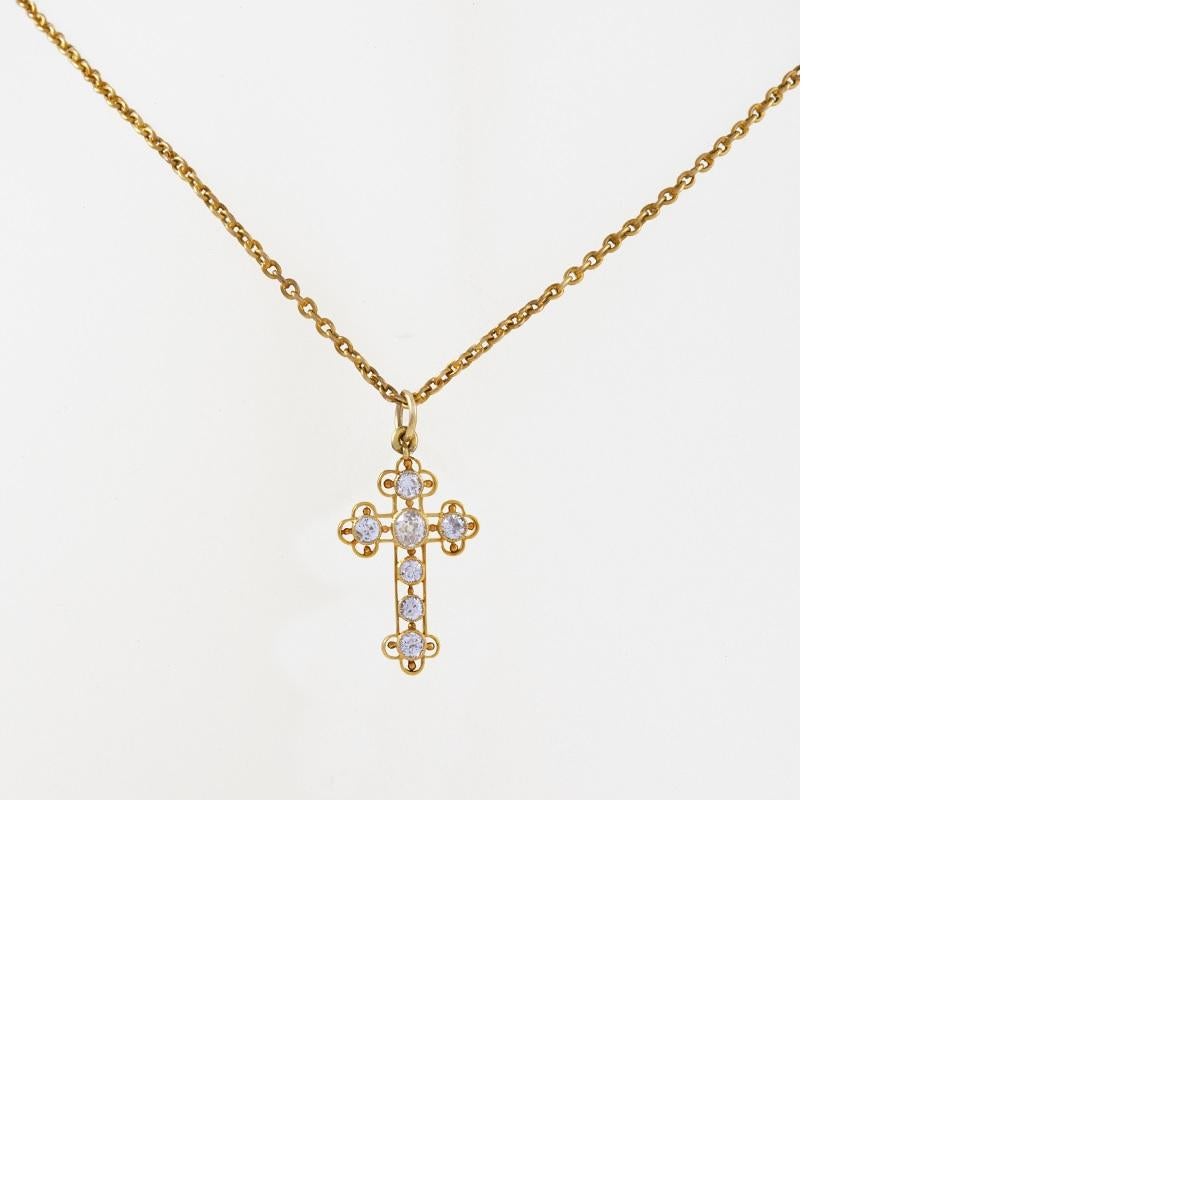 An 18 karat cross pendant with diamonds. The cross, done in delicate filigree work is studded with six Old European Cut diamonds with an approximate total weight of .75carat.

Chain length: 19-1/2